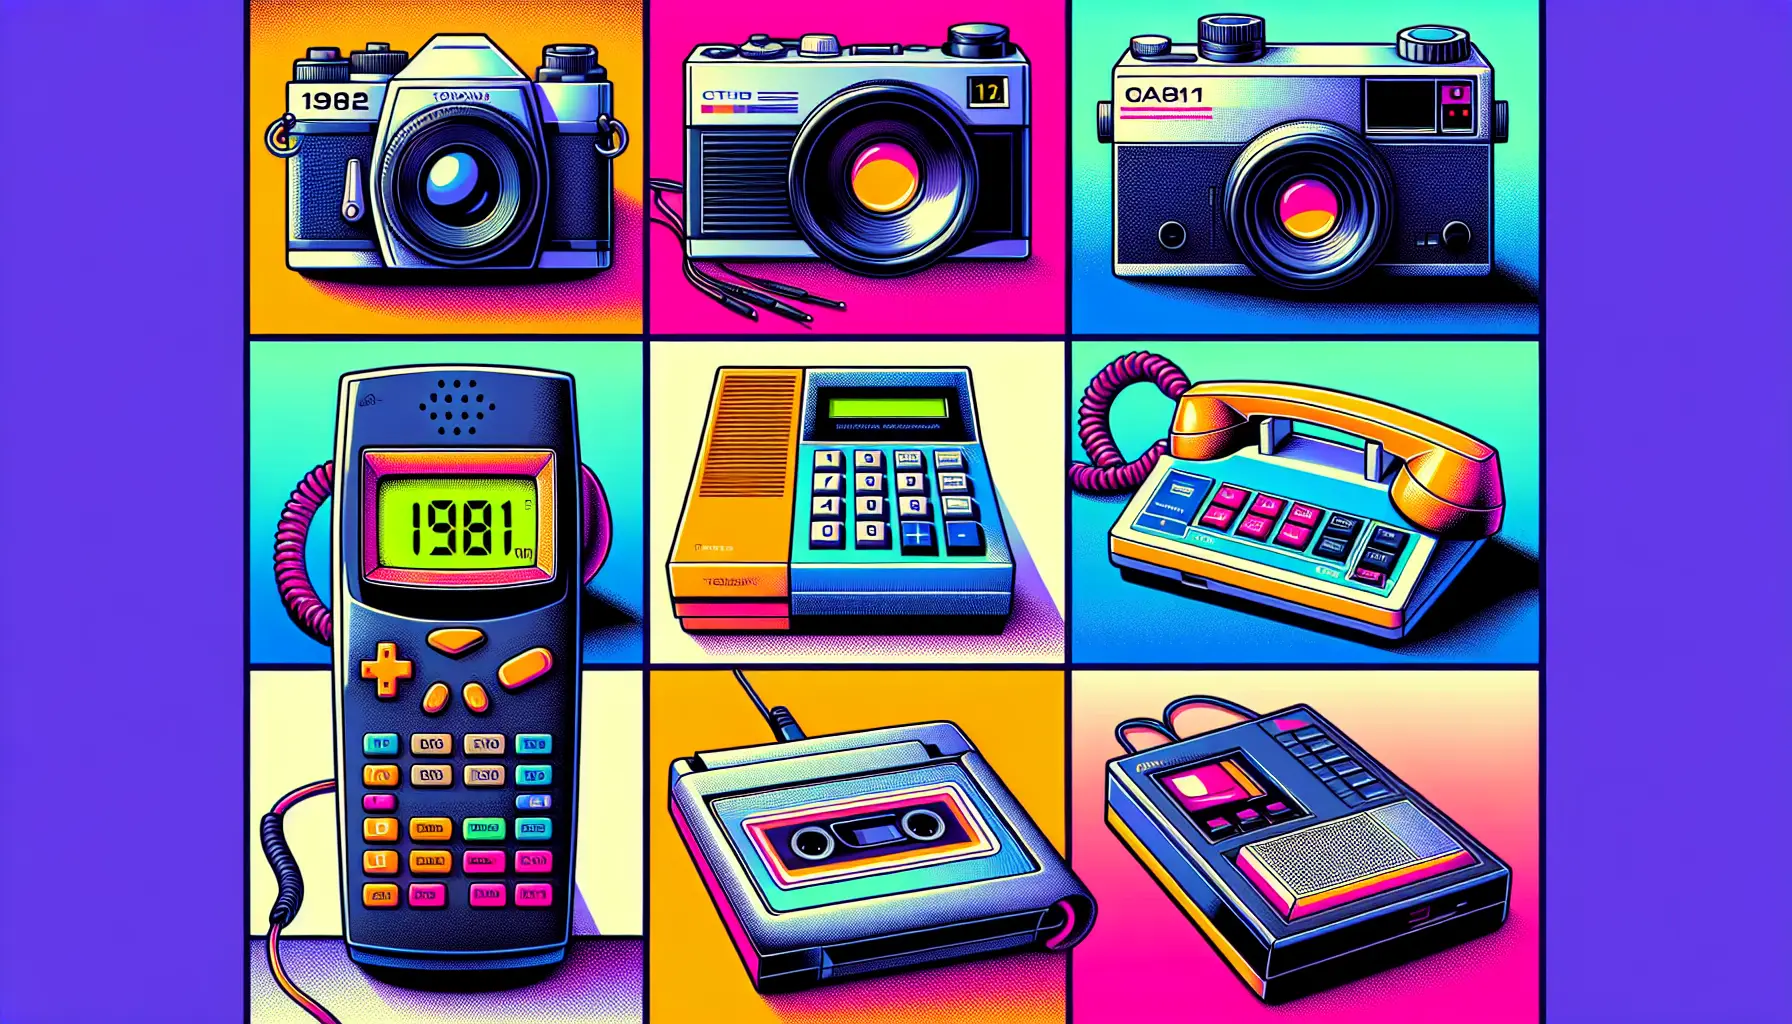 Top 6 Coolest Gadgets from 1981 - What Were the Best Ones?